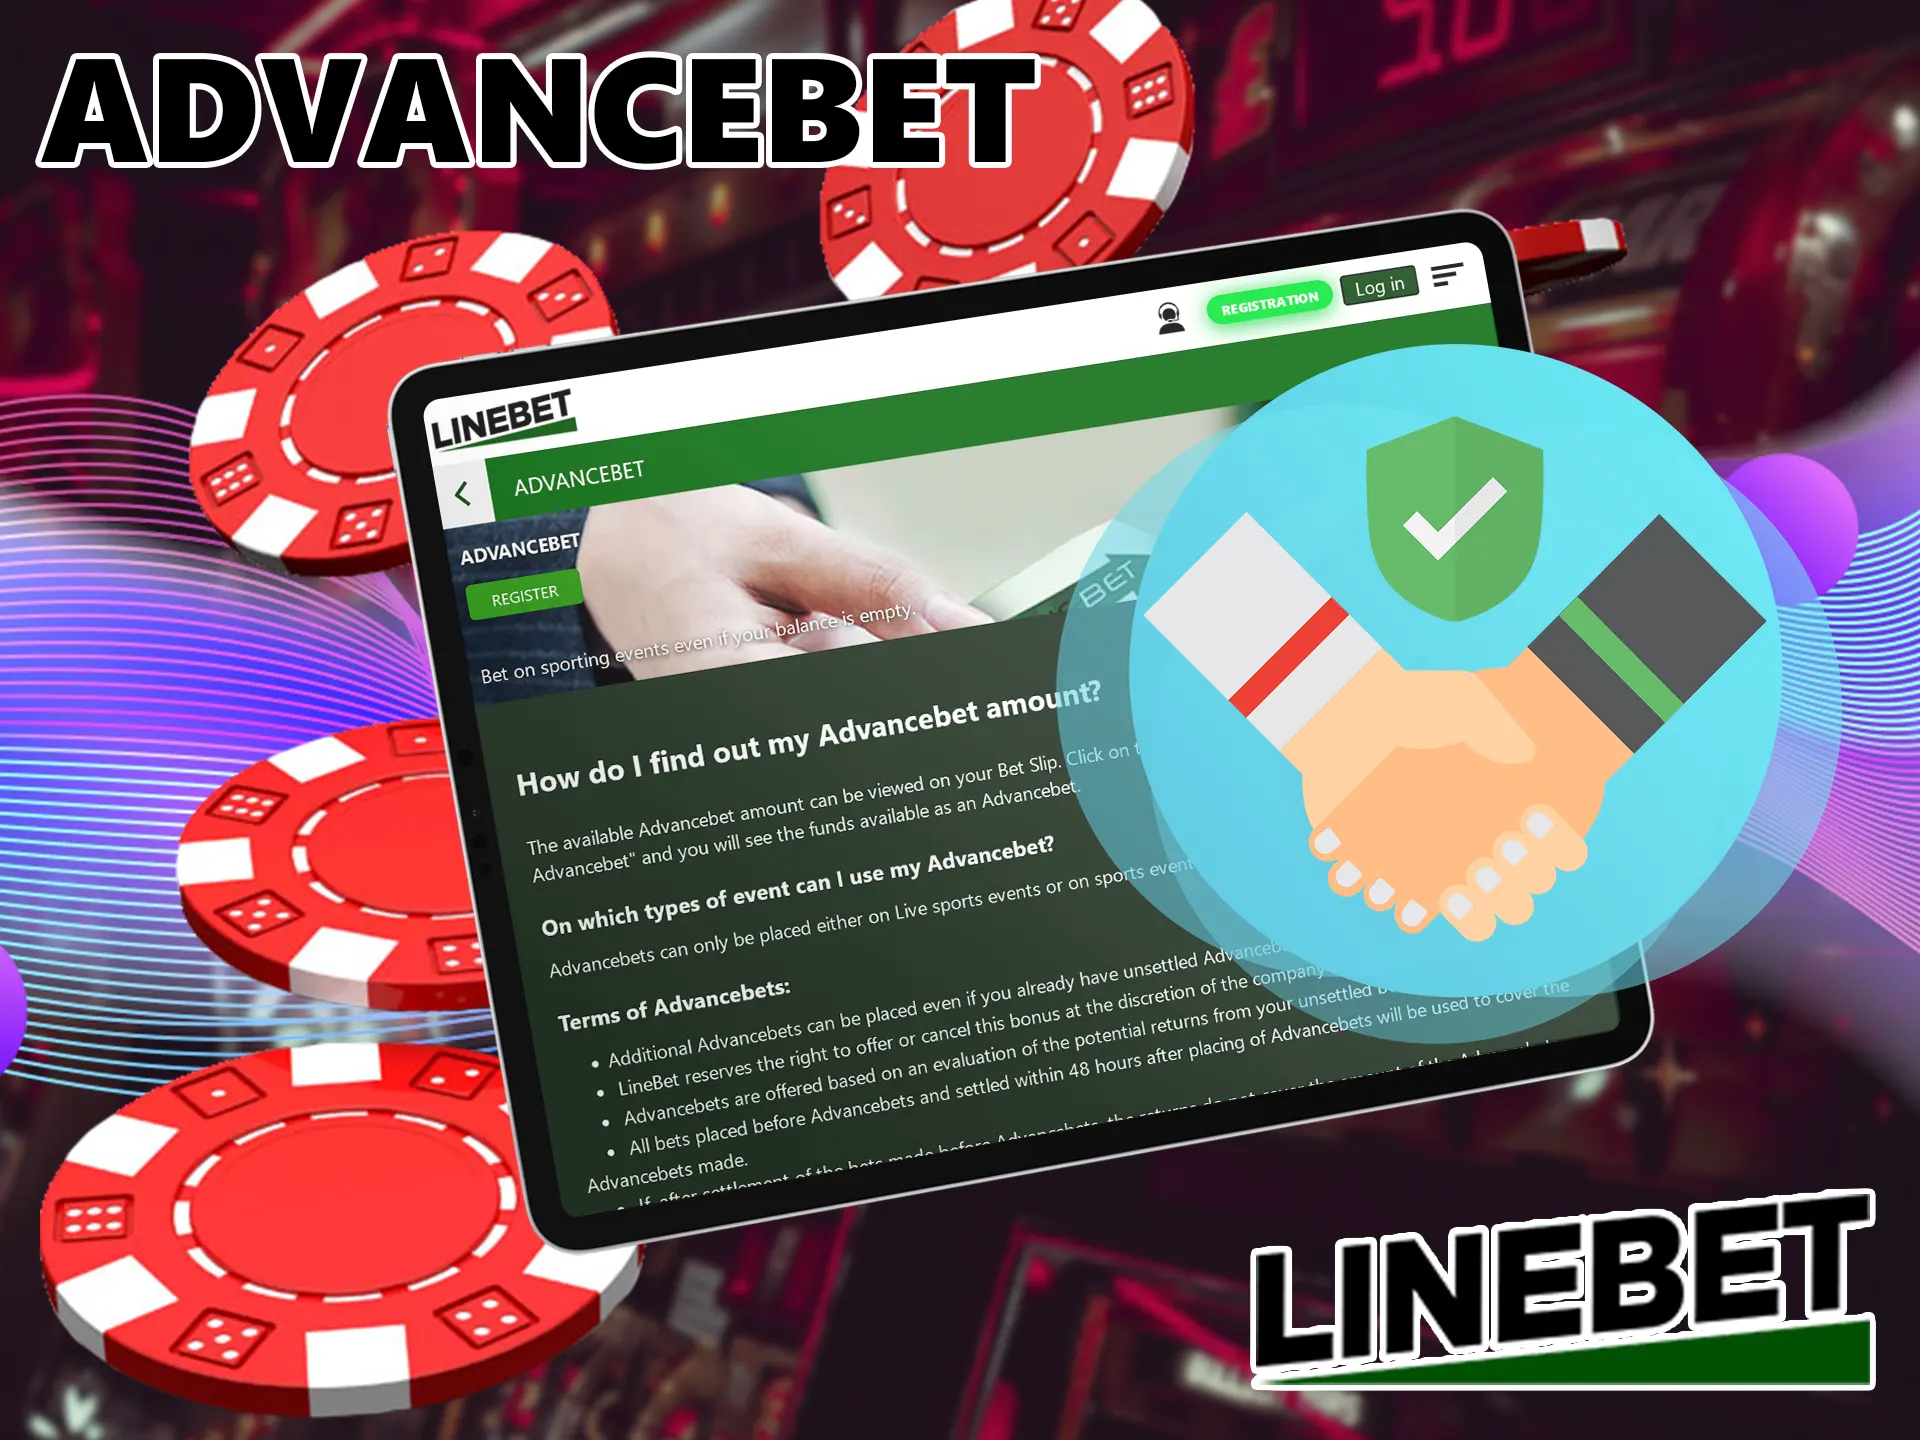 If you don't have any money in your account - that's no reason to deny yourself the betting and casino, you can try this Linebet bonus today.